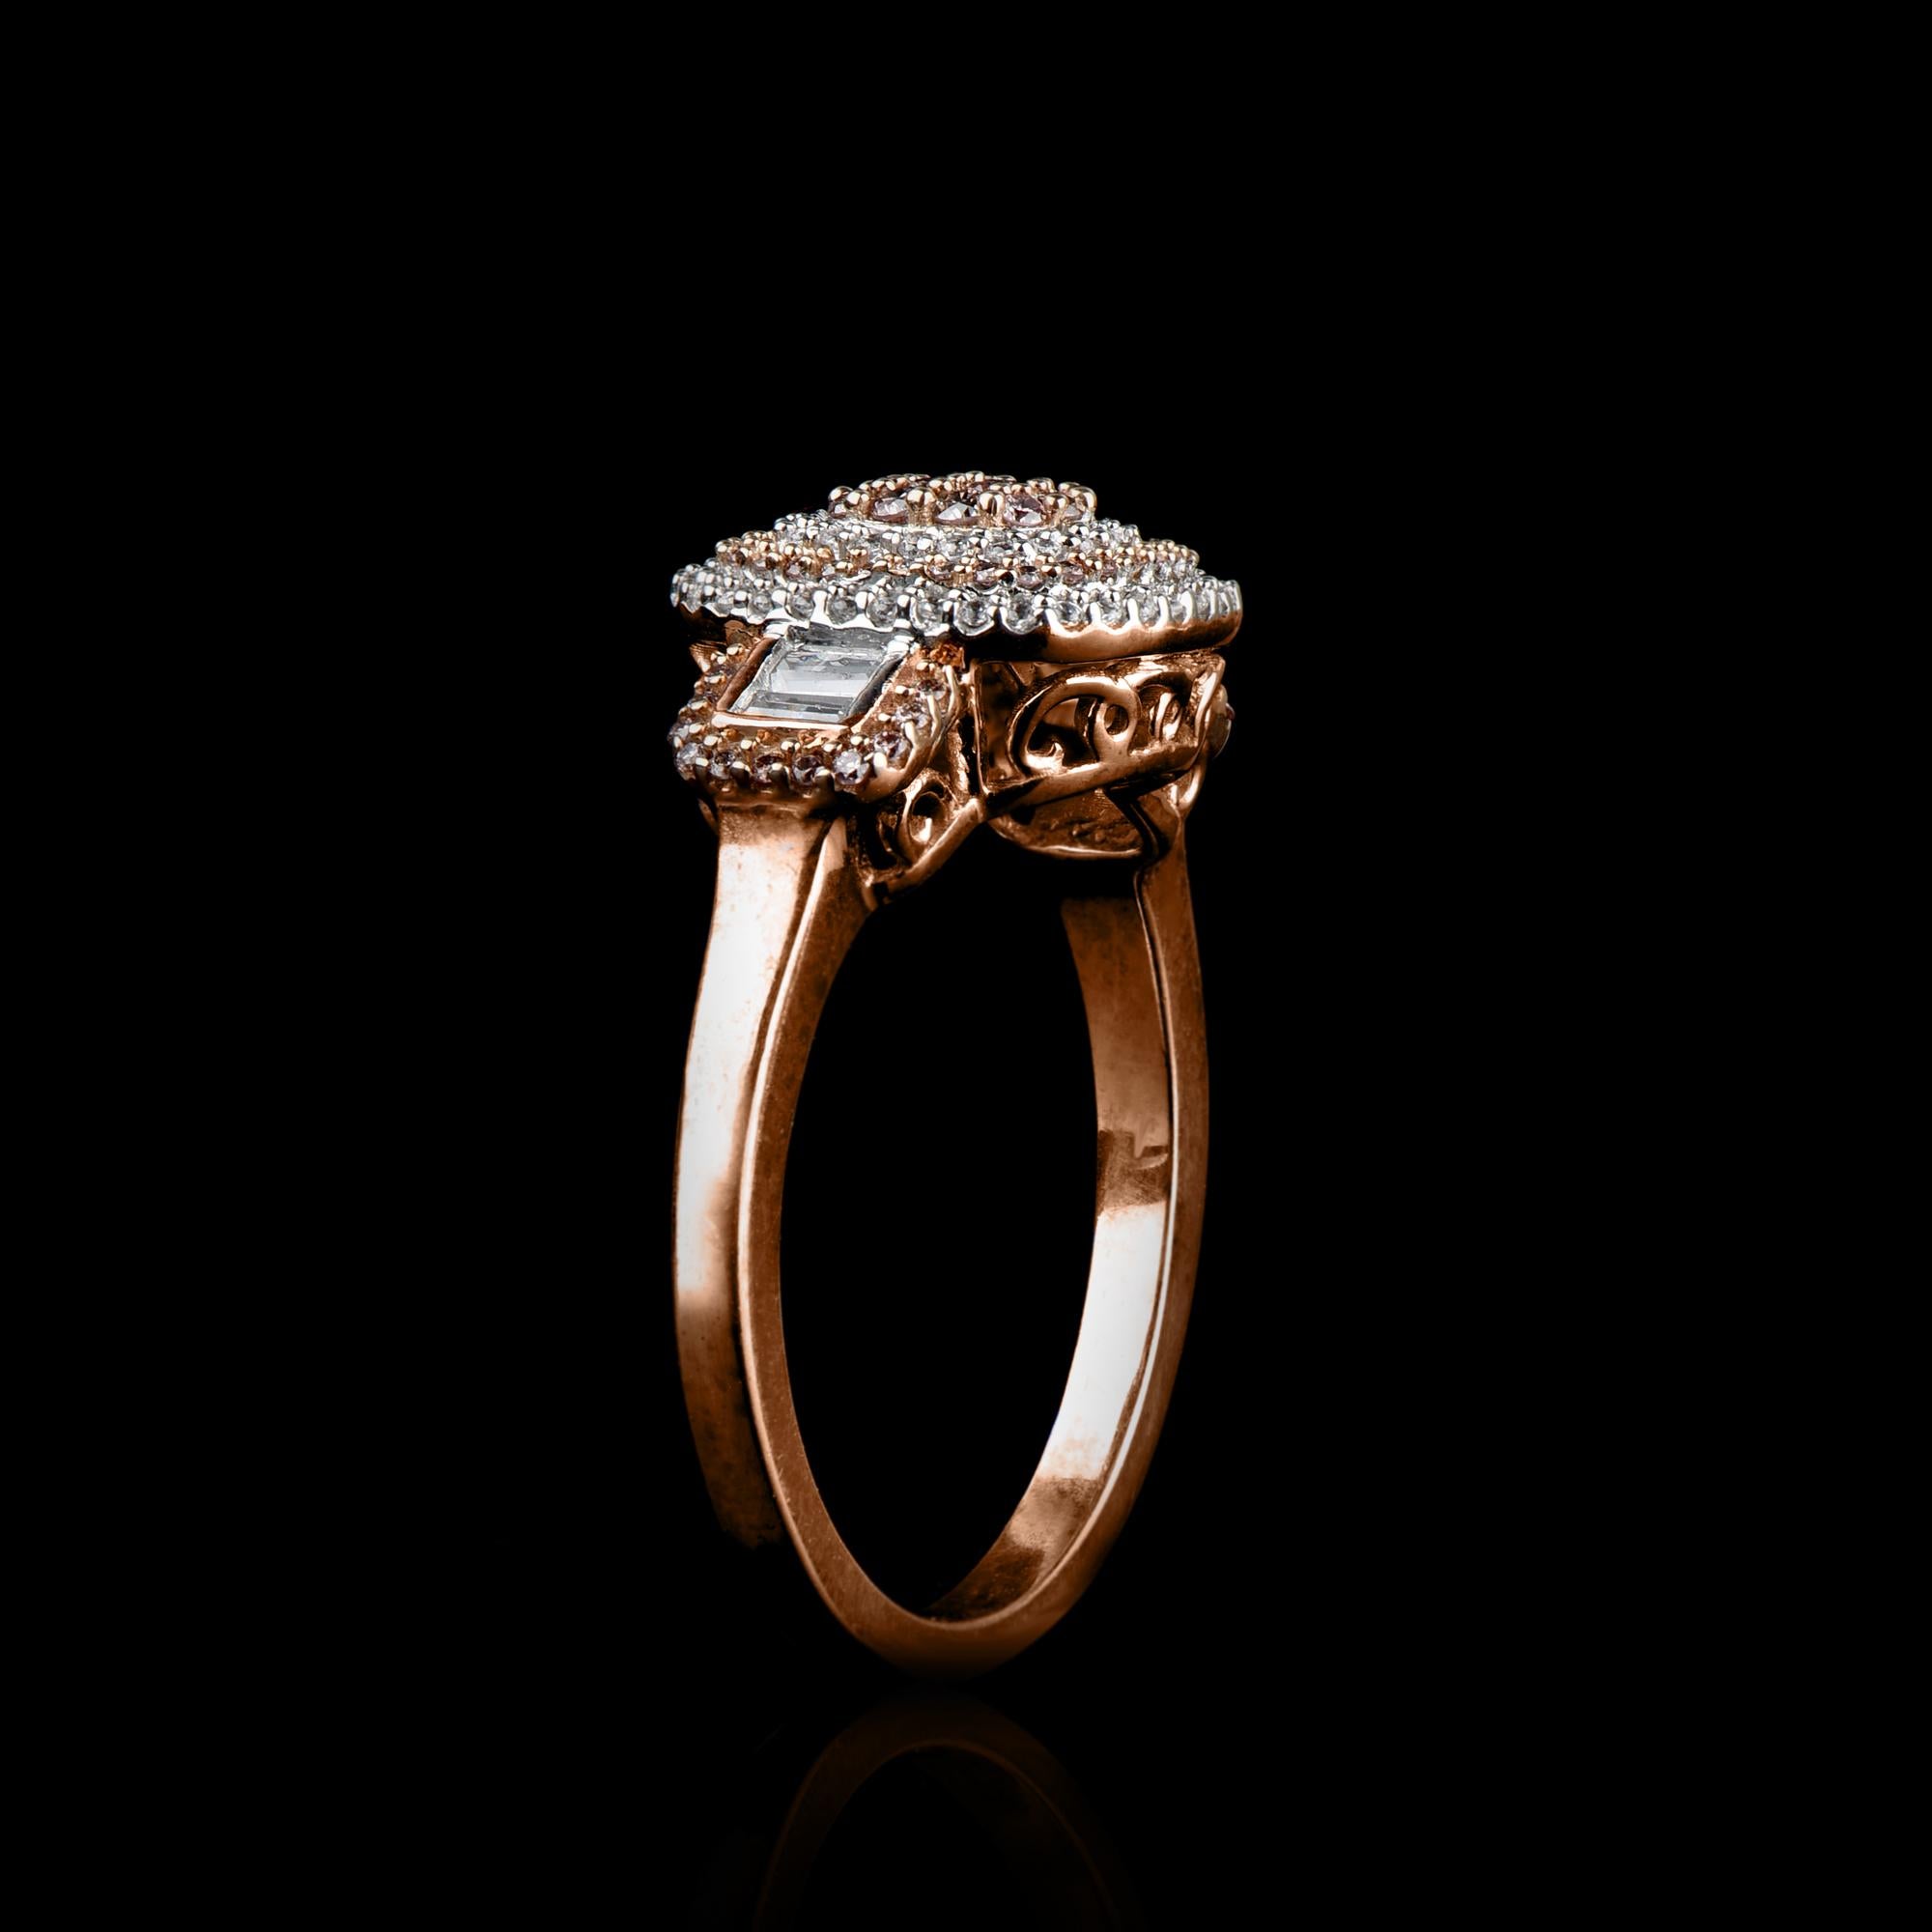 This Round Diamond Engagement Band Ring in 14K rose gold showcases 0.50 carats of sparkling 58 round, 4 baguette and 66 natural pink rosé diamonds set in prong and channel setting. The diamonds are natural, not-treated and conflict-free with H-I